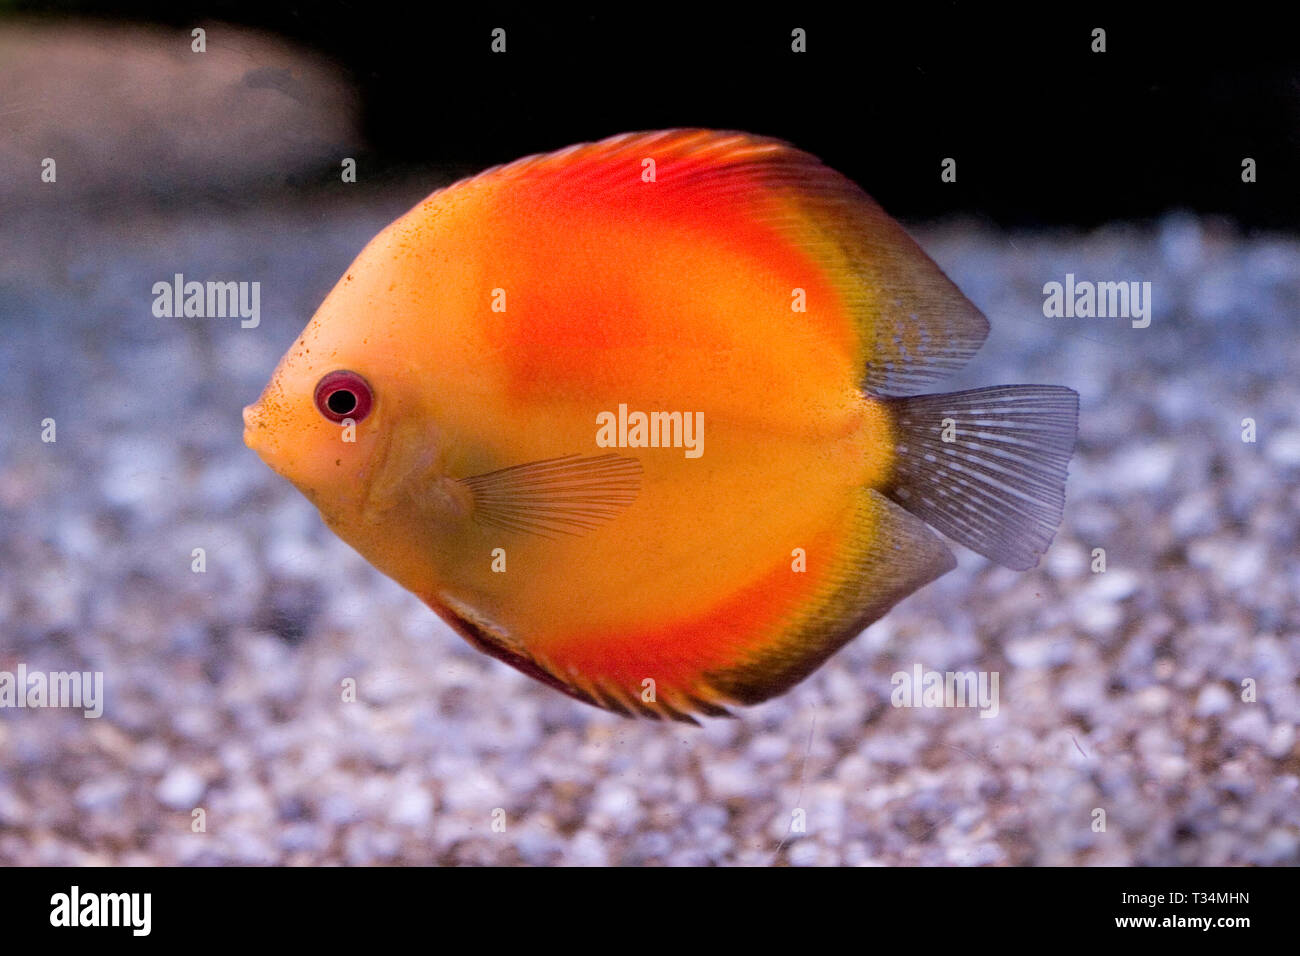 Close-up of a fish swimming underwater Stock Photo